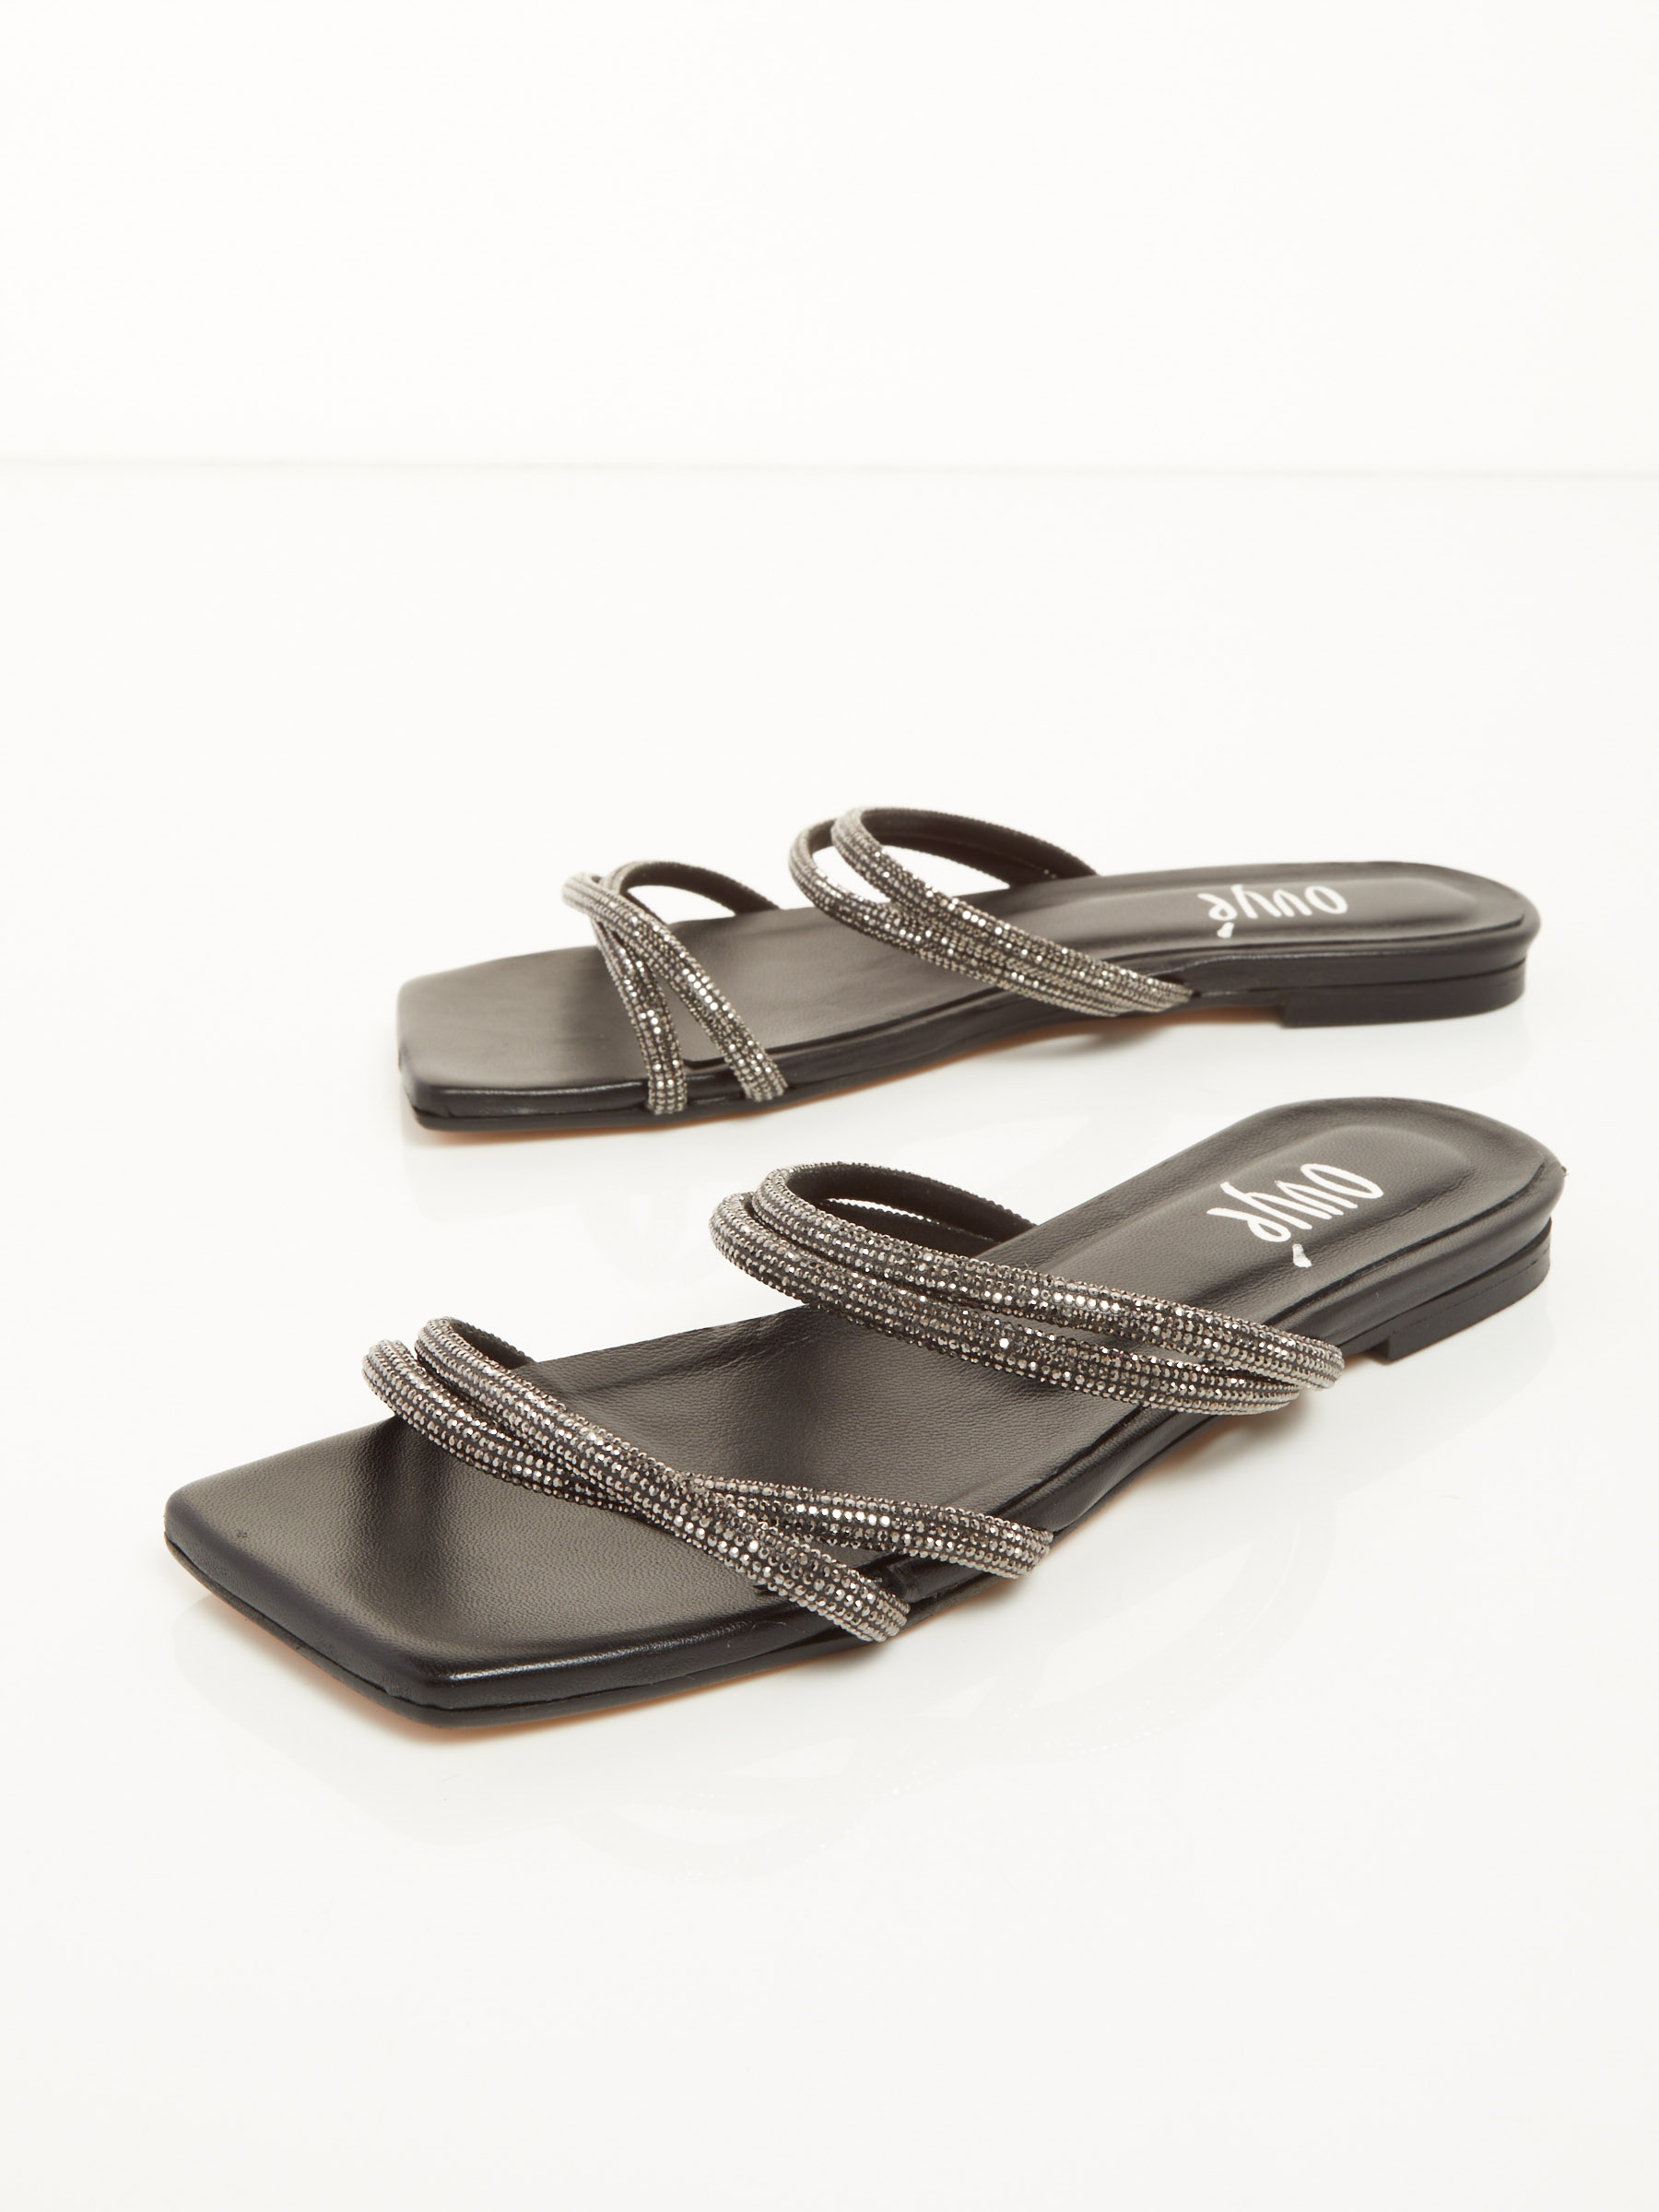 leather flat sandals with rhinestones